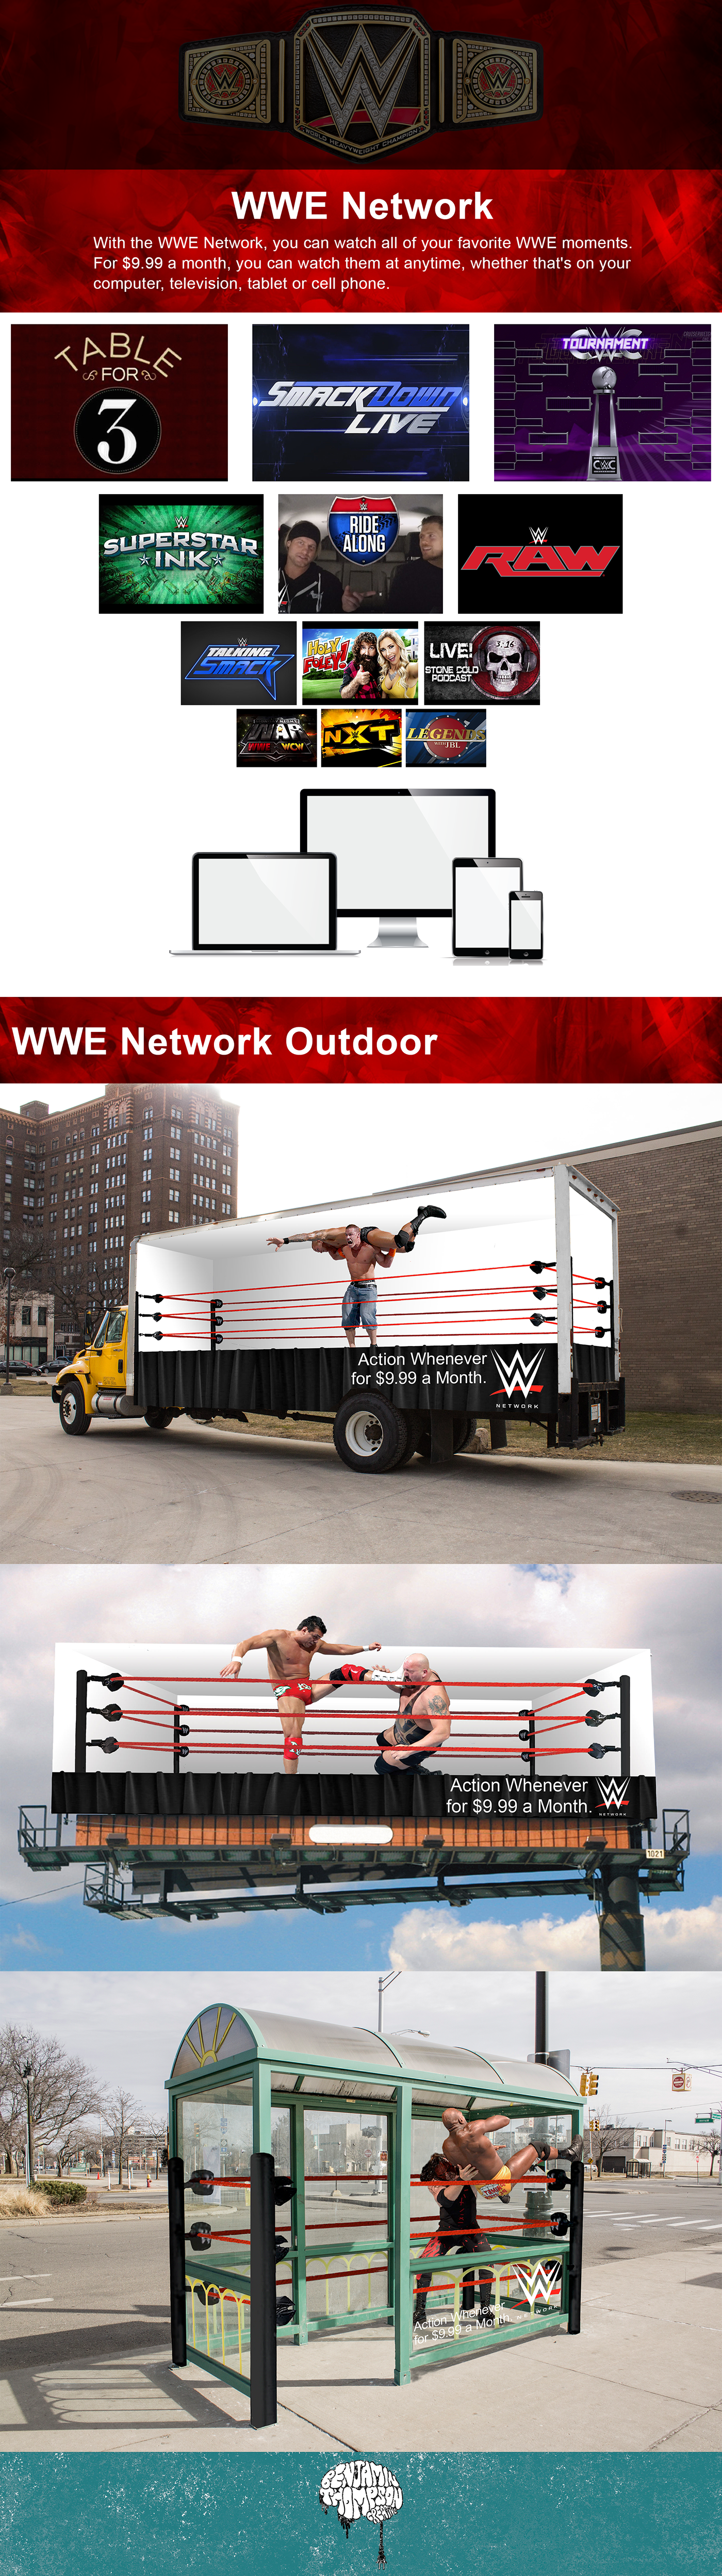 Advertising  WWE campaign Outdoor out of home art direction  Billboards print analogy